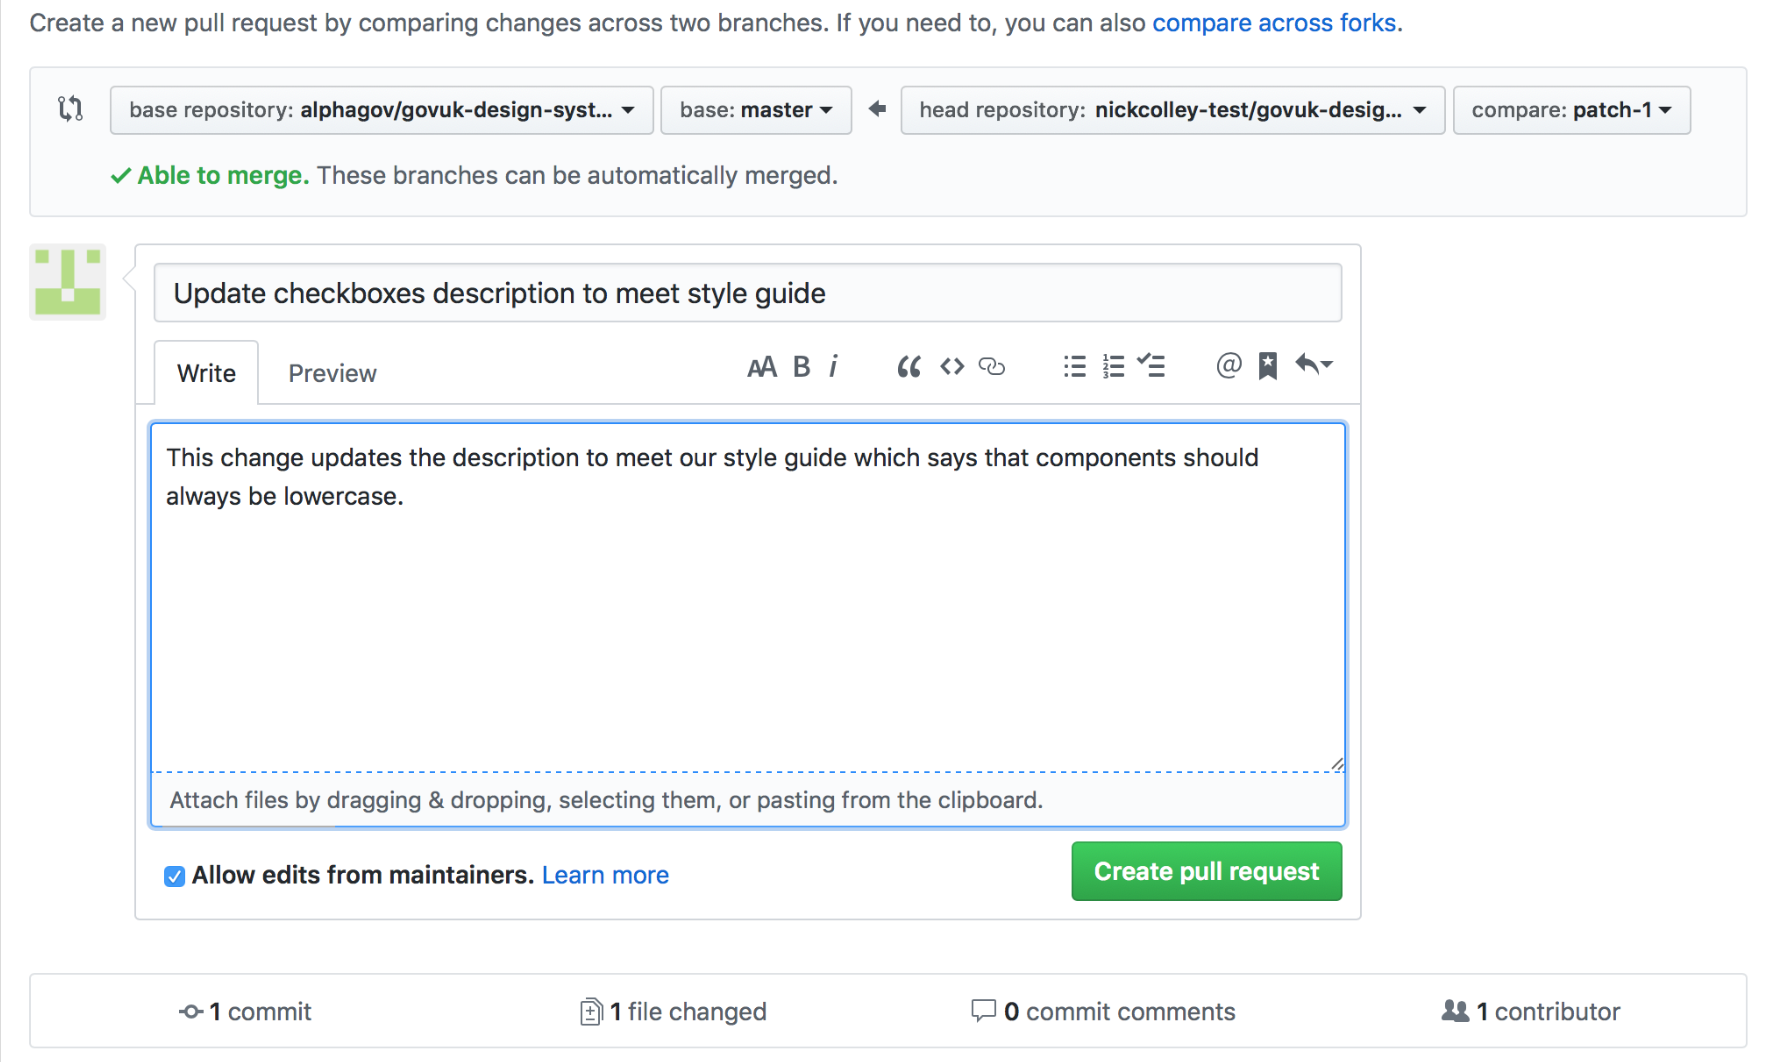 Create pull request view in GitHub. It is pre-filled with the summary and the description from the previous propose change view. There is a button to create a pull request.